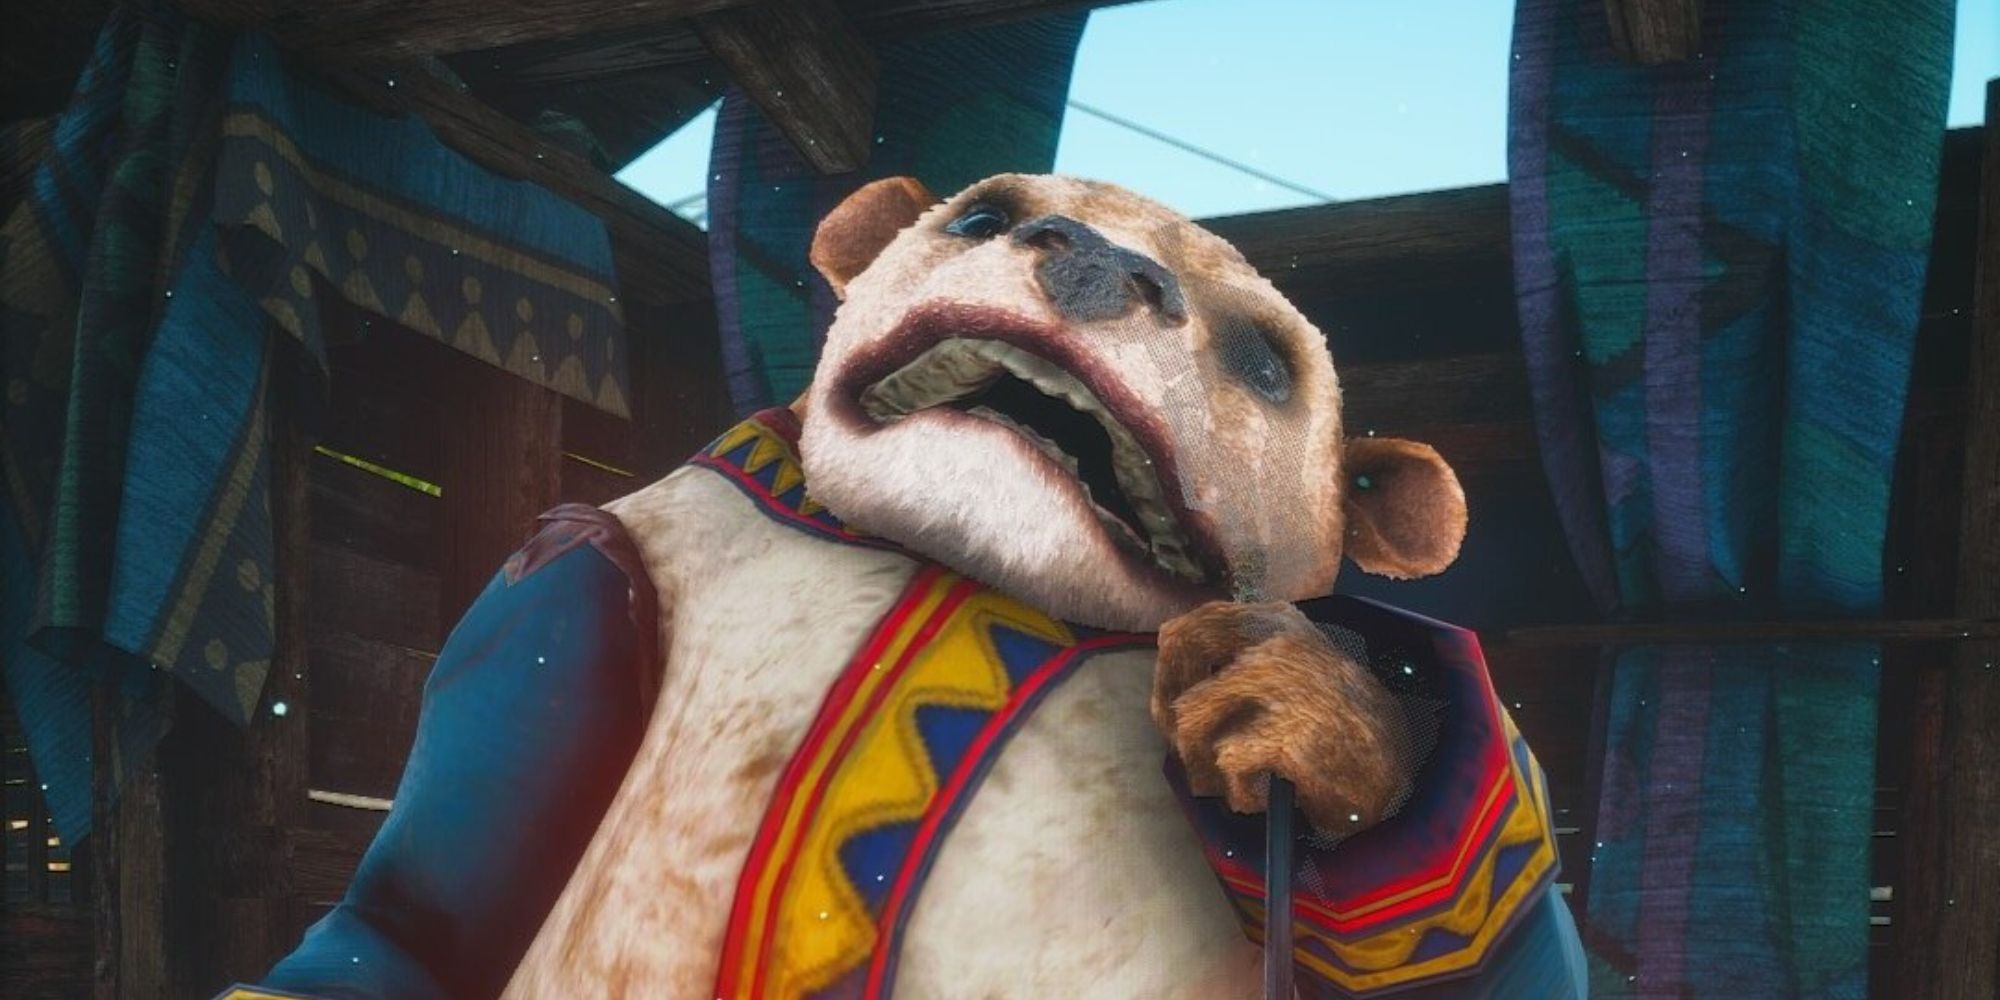 the mirage bear from biomutant sitting in a shelter